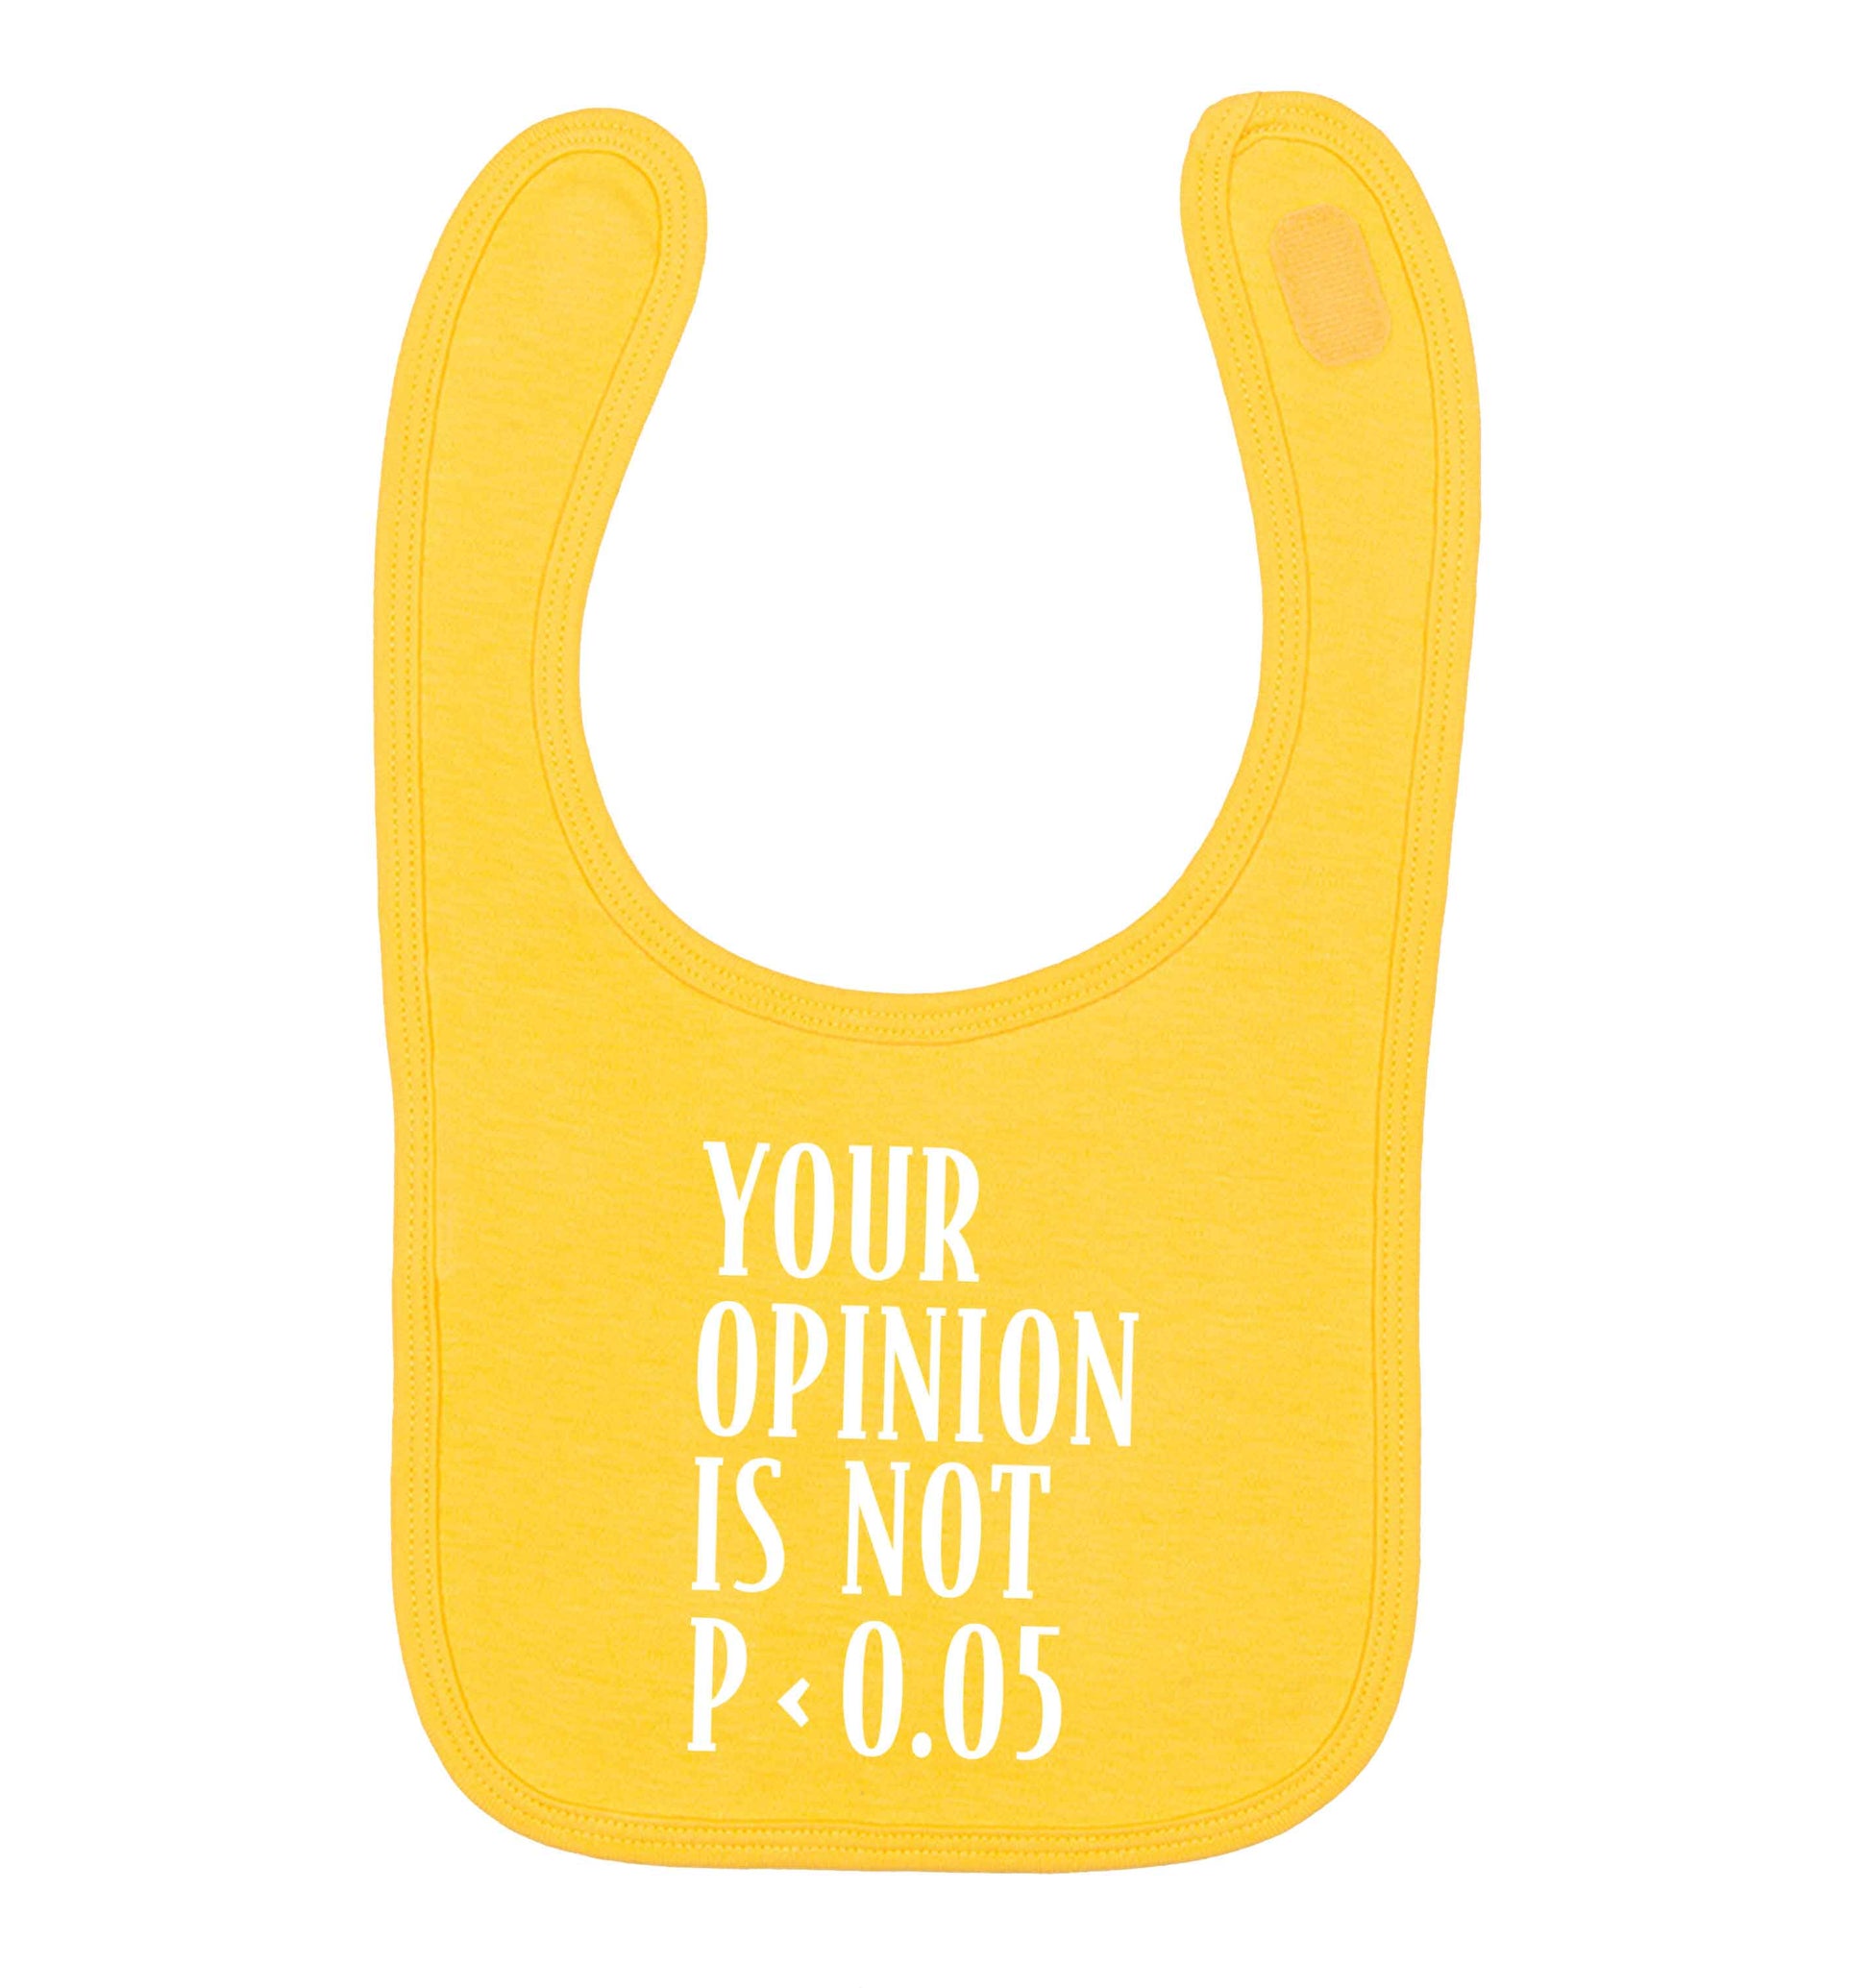 Your opinion is not P < 0.05yellow baby bib